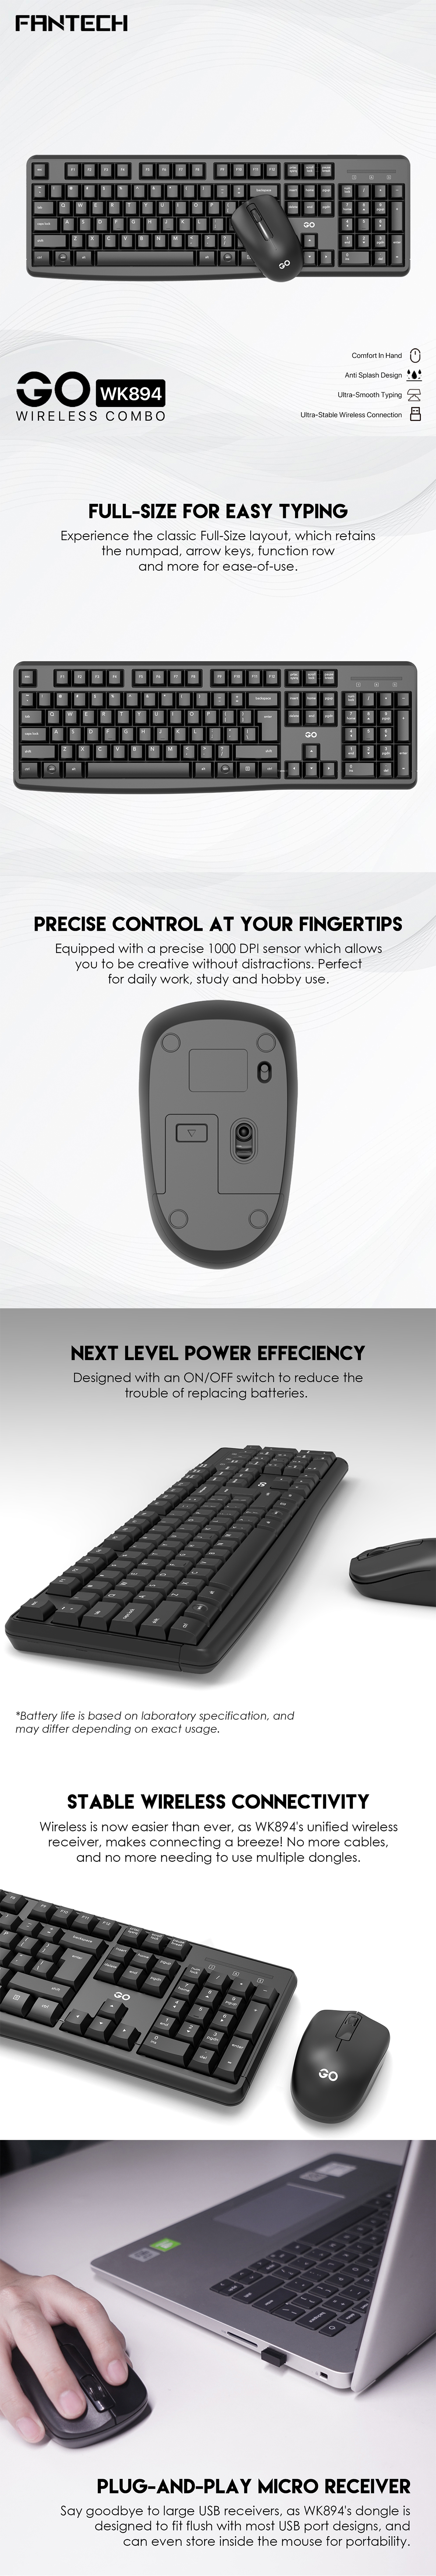 A large marketing image providing additional information about the product Fantech GO WK894 Wireless Office Keyboard and Mouse Combo - Additional alt info not provided